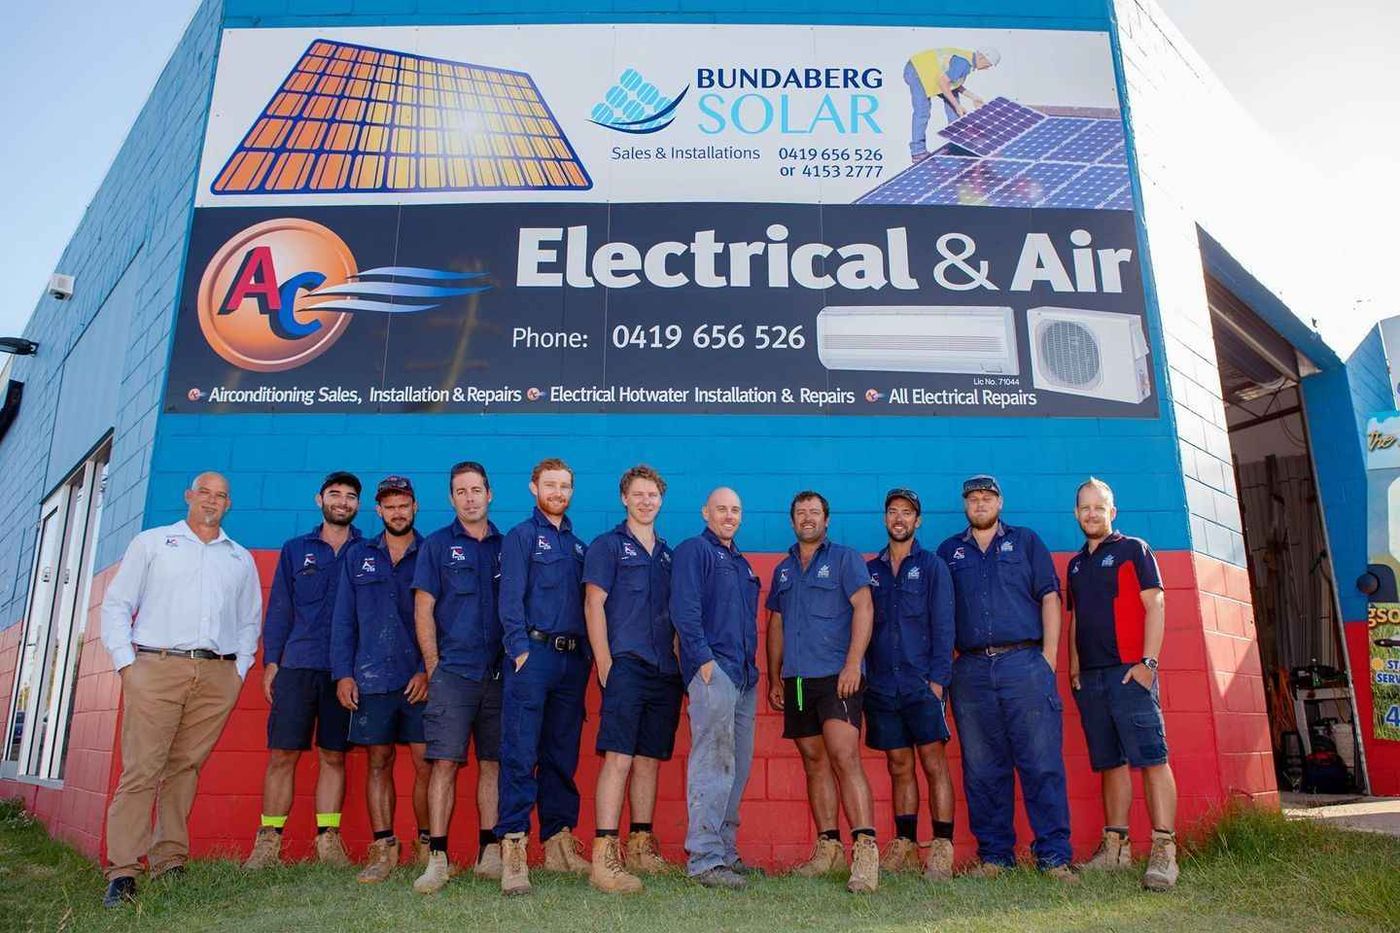 AC Electrical & Air image